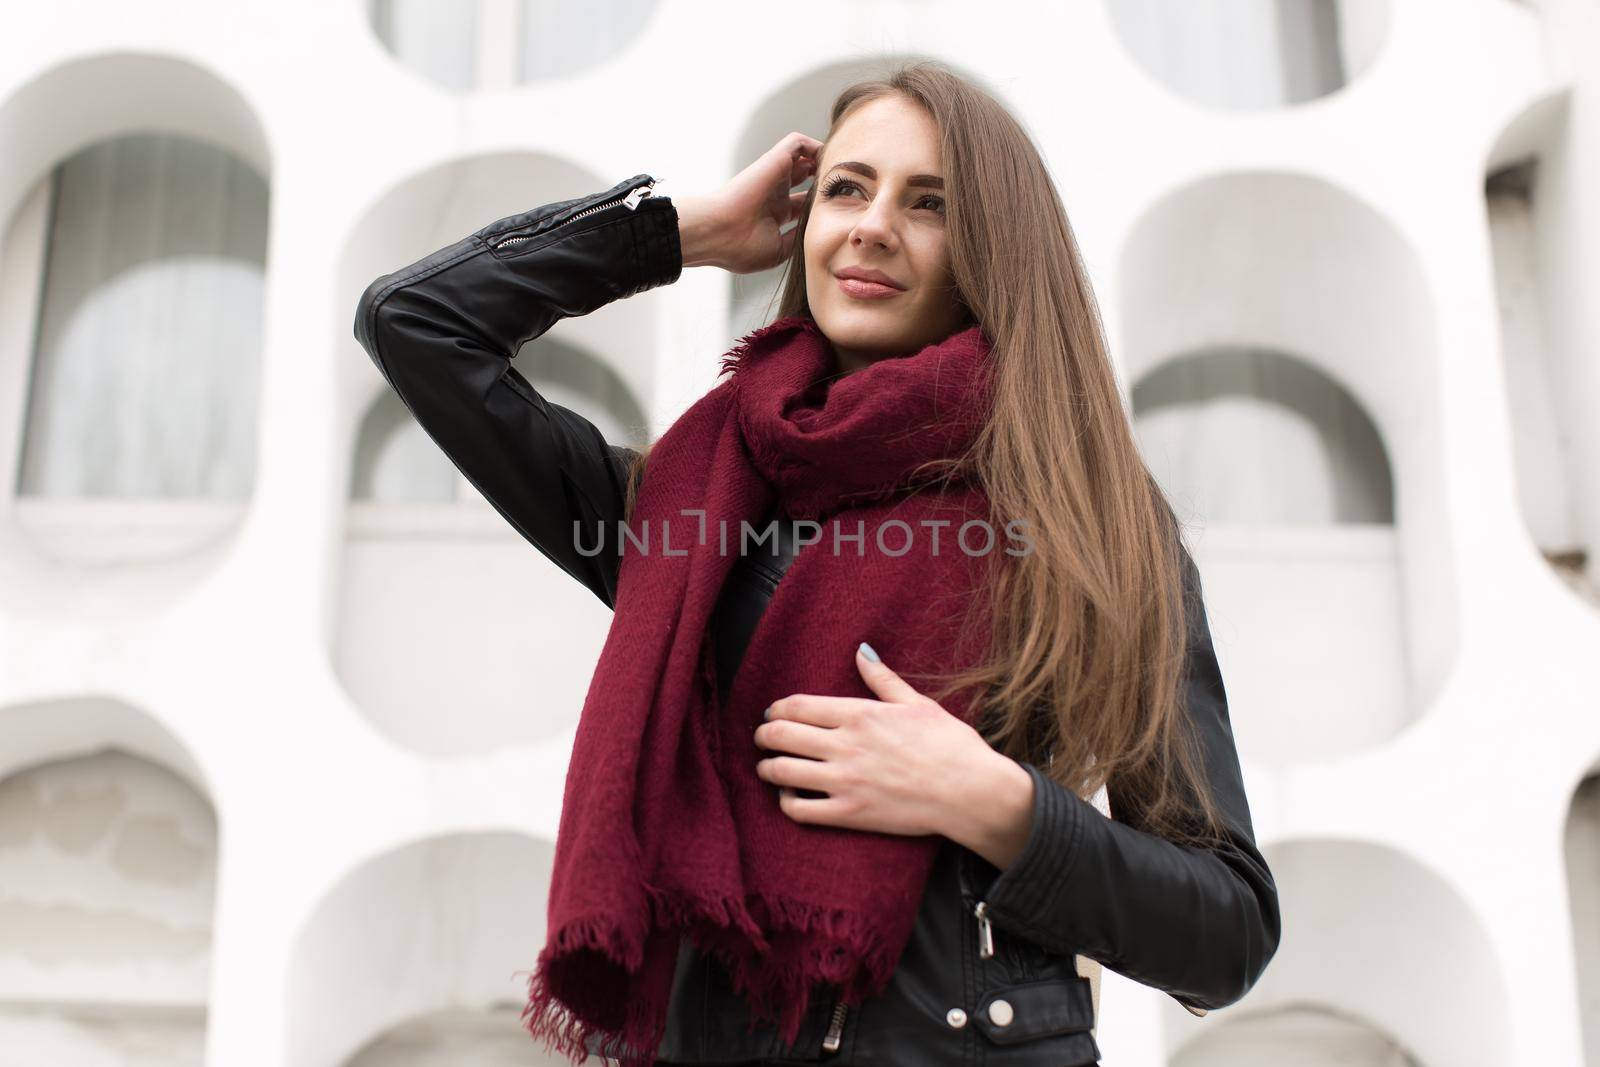 Fashion young woman in a black rock on a white wall background